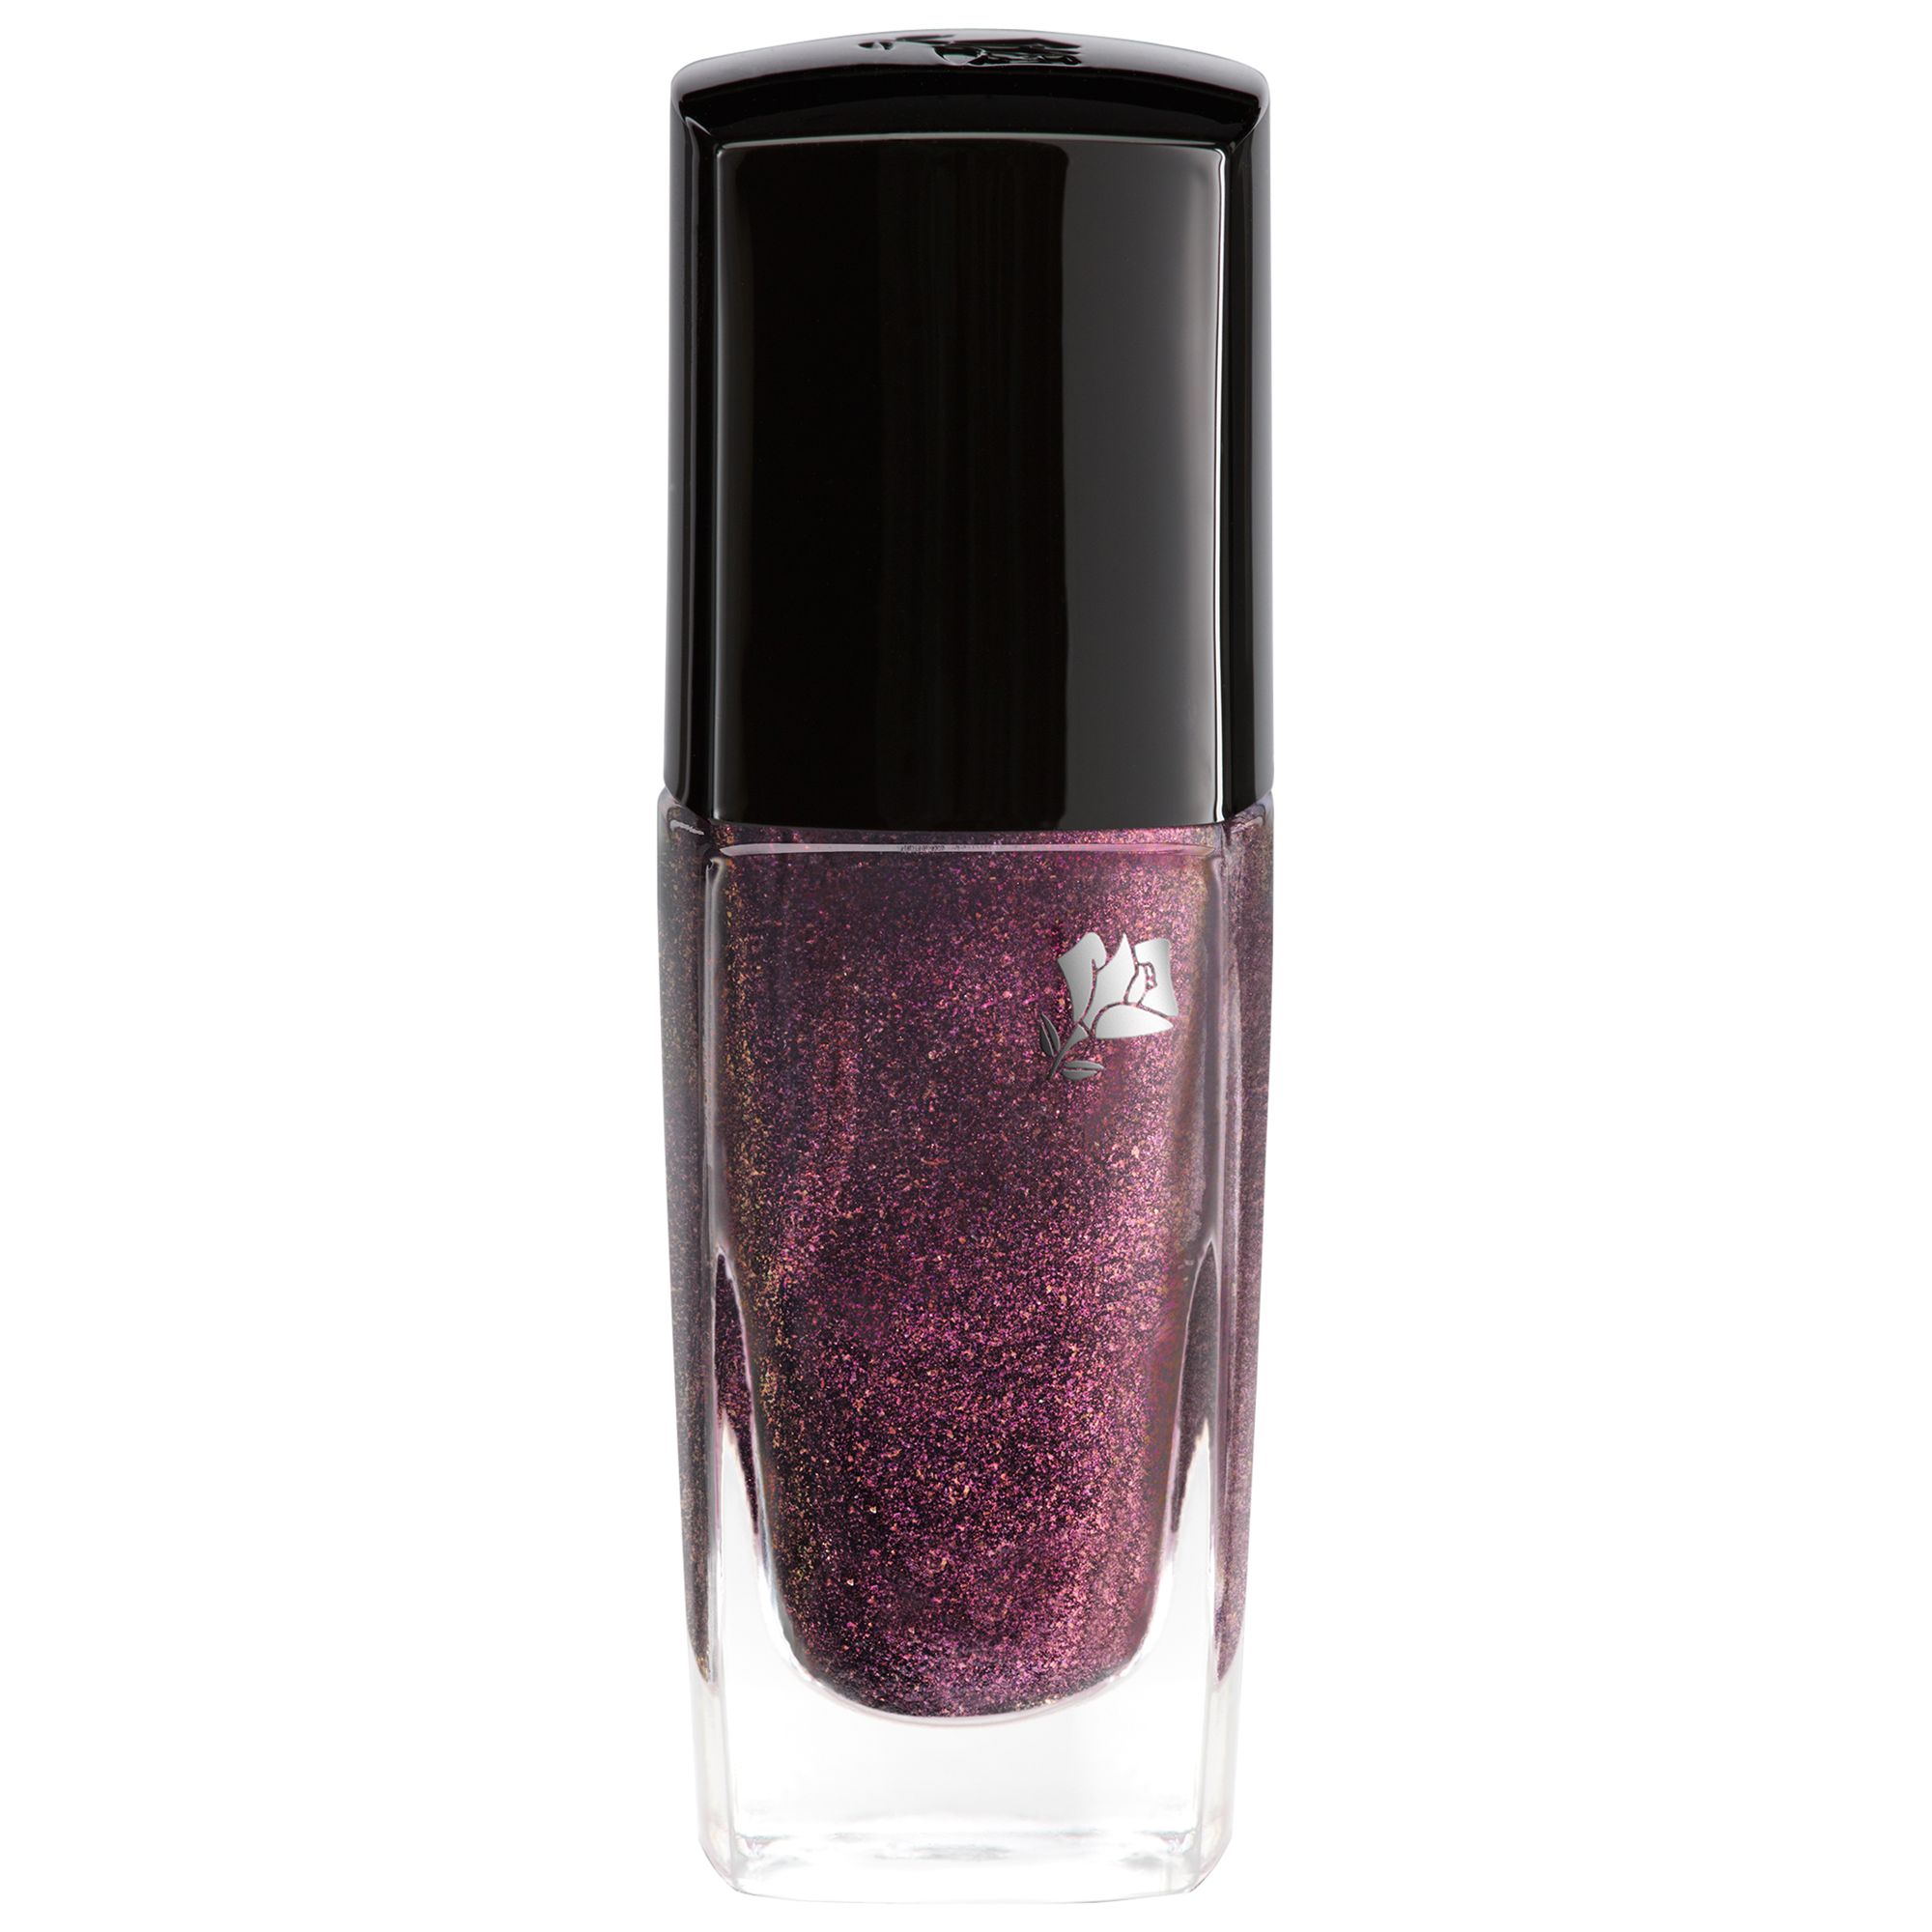 shop for Lancôme Vernis In Love Winter Collection at Shopo